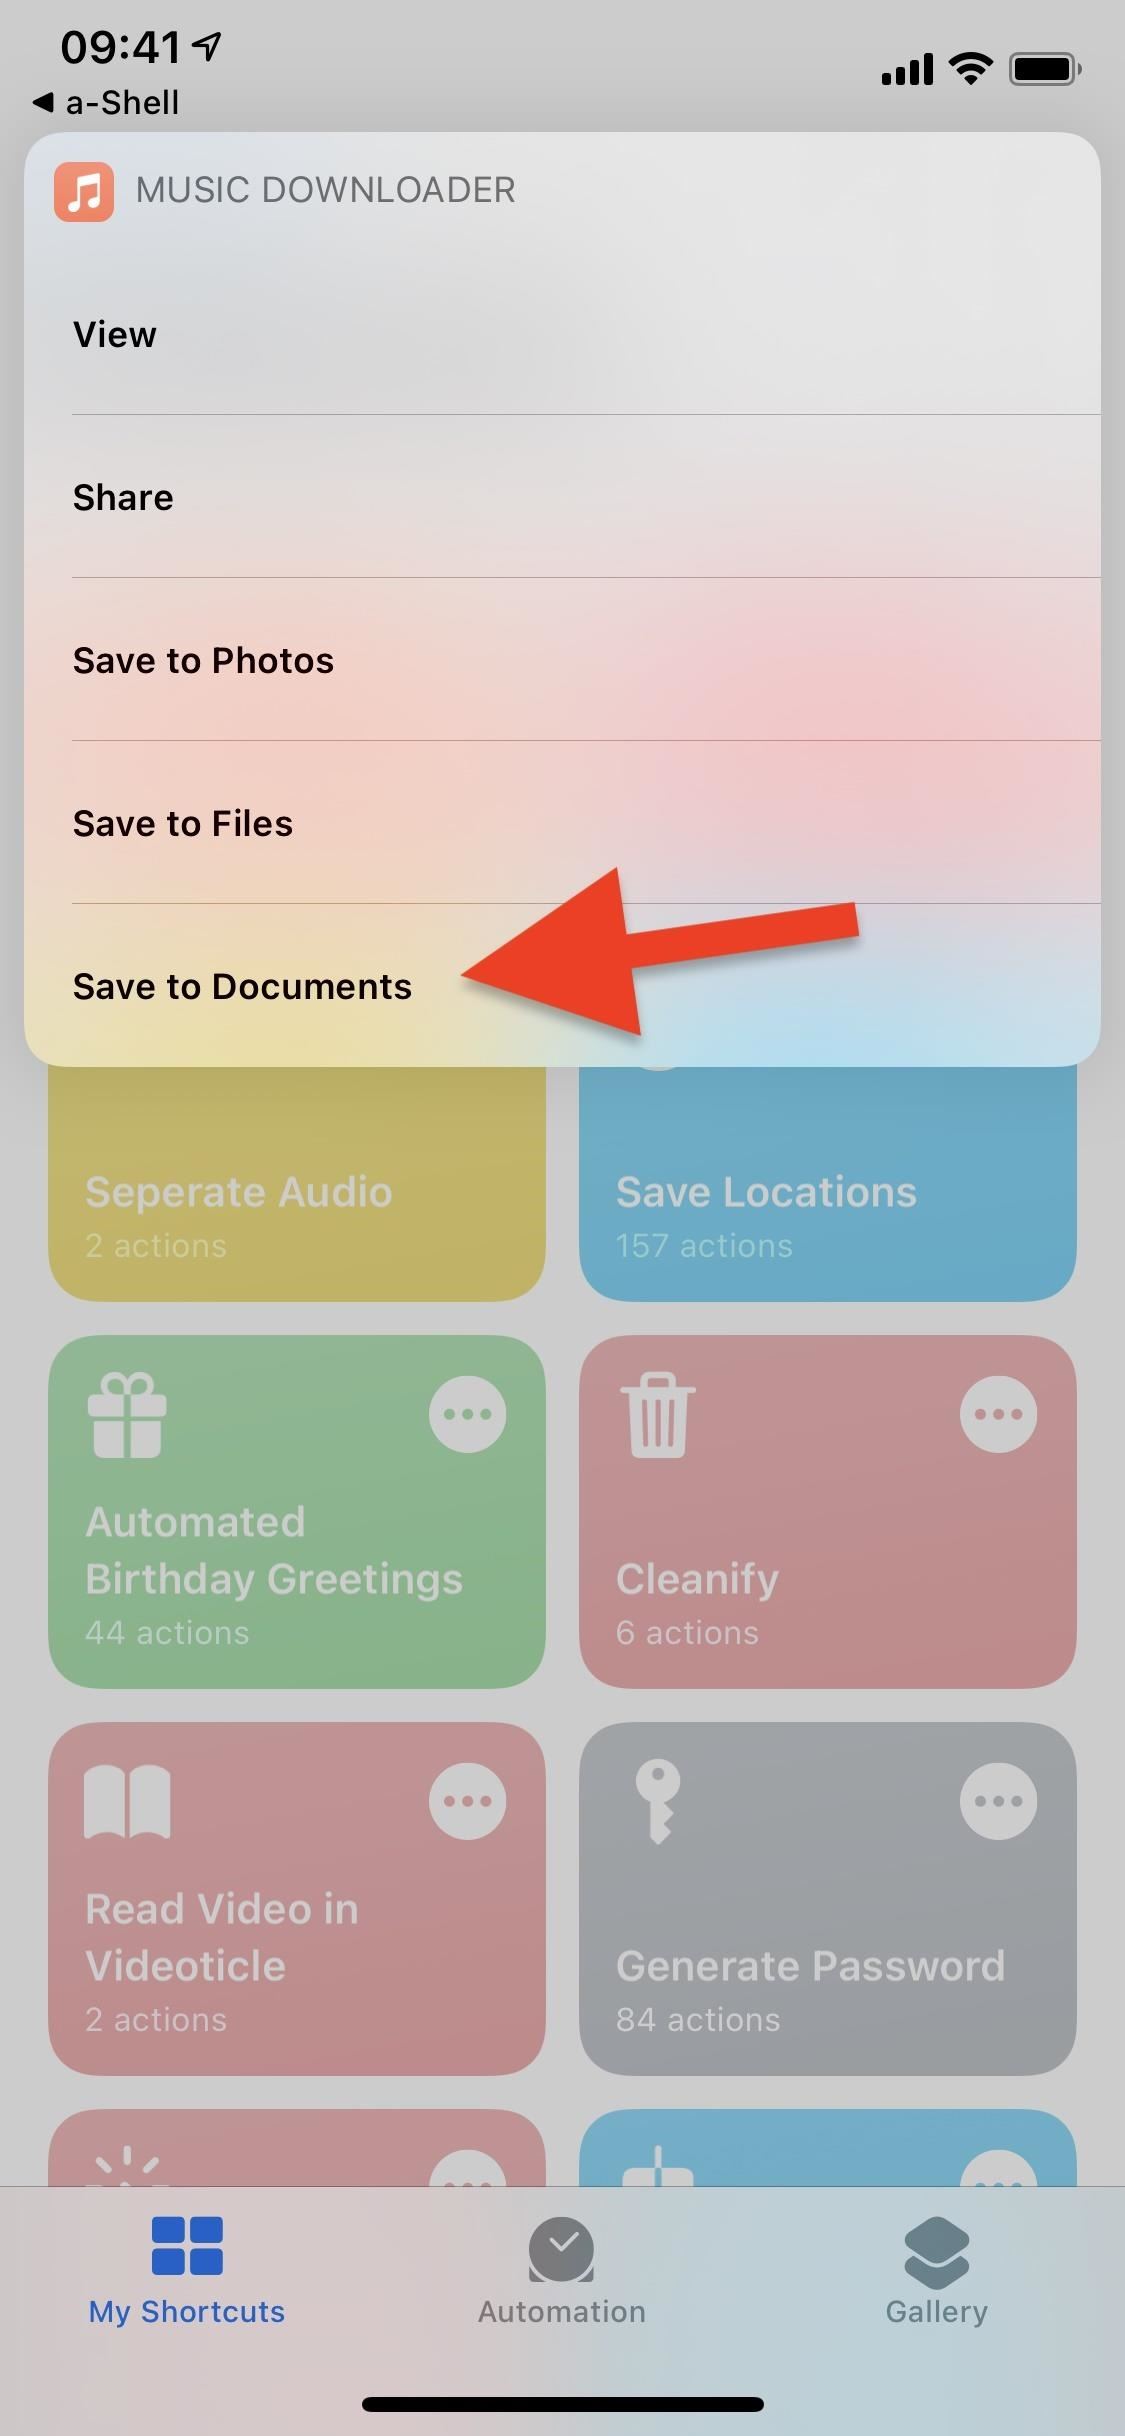 This iOS Shortcut Finds & Downloads Free Songs for You to Listen to Offline on Your iPhone